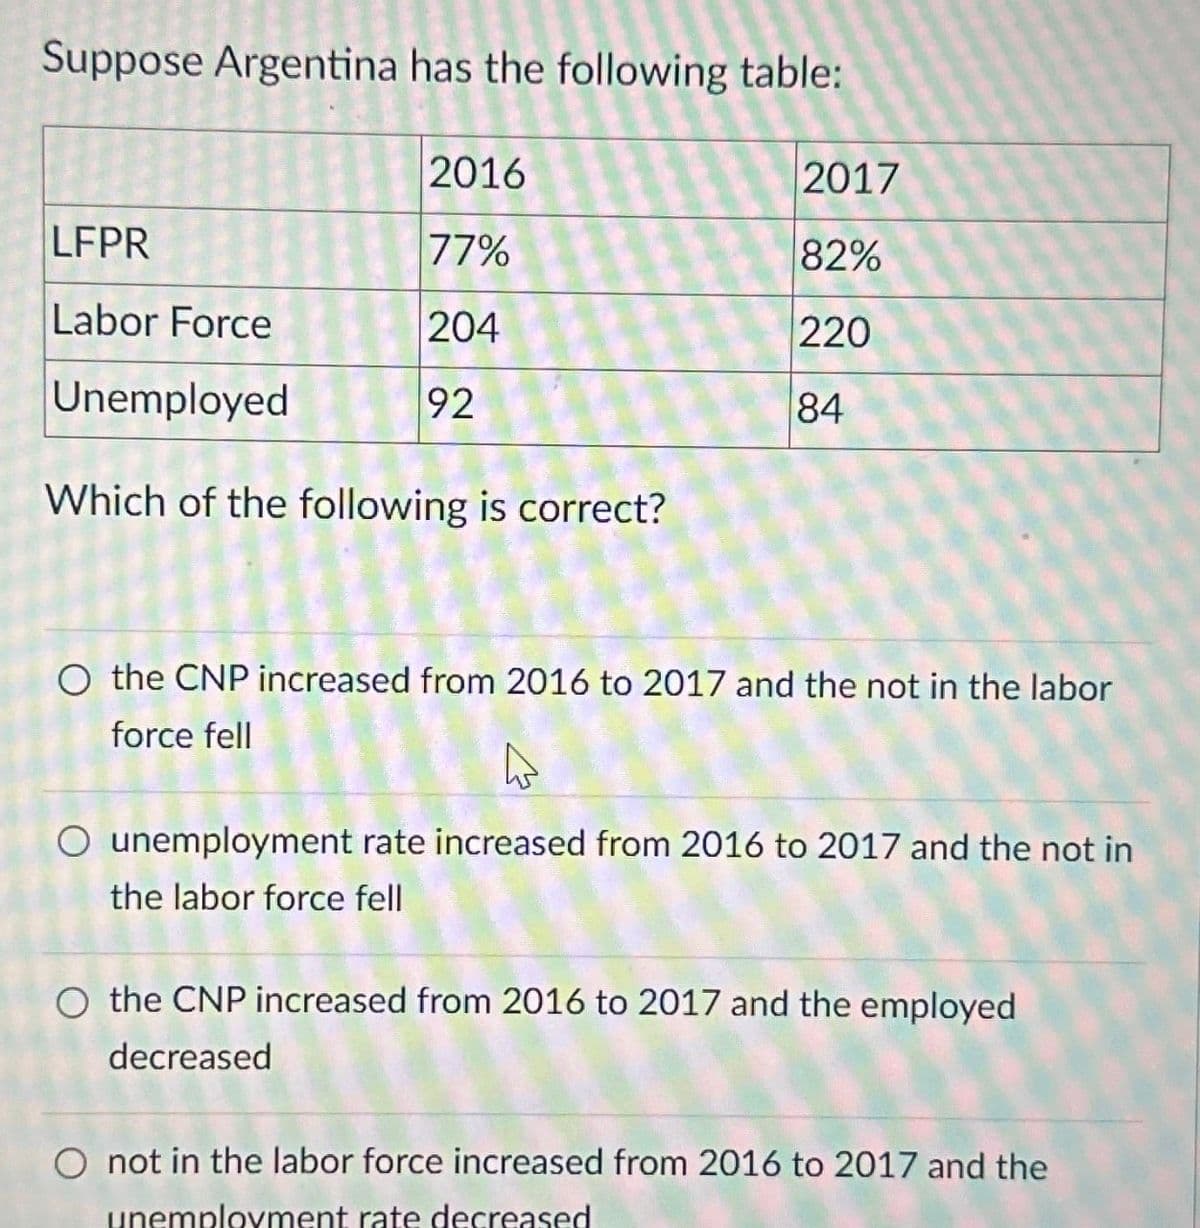 Suppose Argentina has the following table:
2016
2017
LFPR
77%
82%
Labor Force
204
220
Unemployed
92
84
Which of the following is correct?
O the CNP increased from 2016 to 2017 and the not in the labor
force fell
O unemployment rate increased from 2016 to 2017 and the not in
the labor force fell
O the CNP increased from 2016 to 2017 and the employed
decreased
O not in the labor force increased from 2016 to 2017 and the
decreased